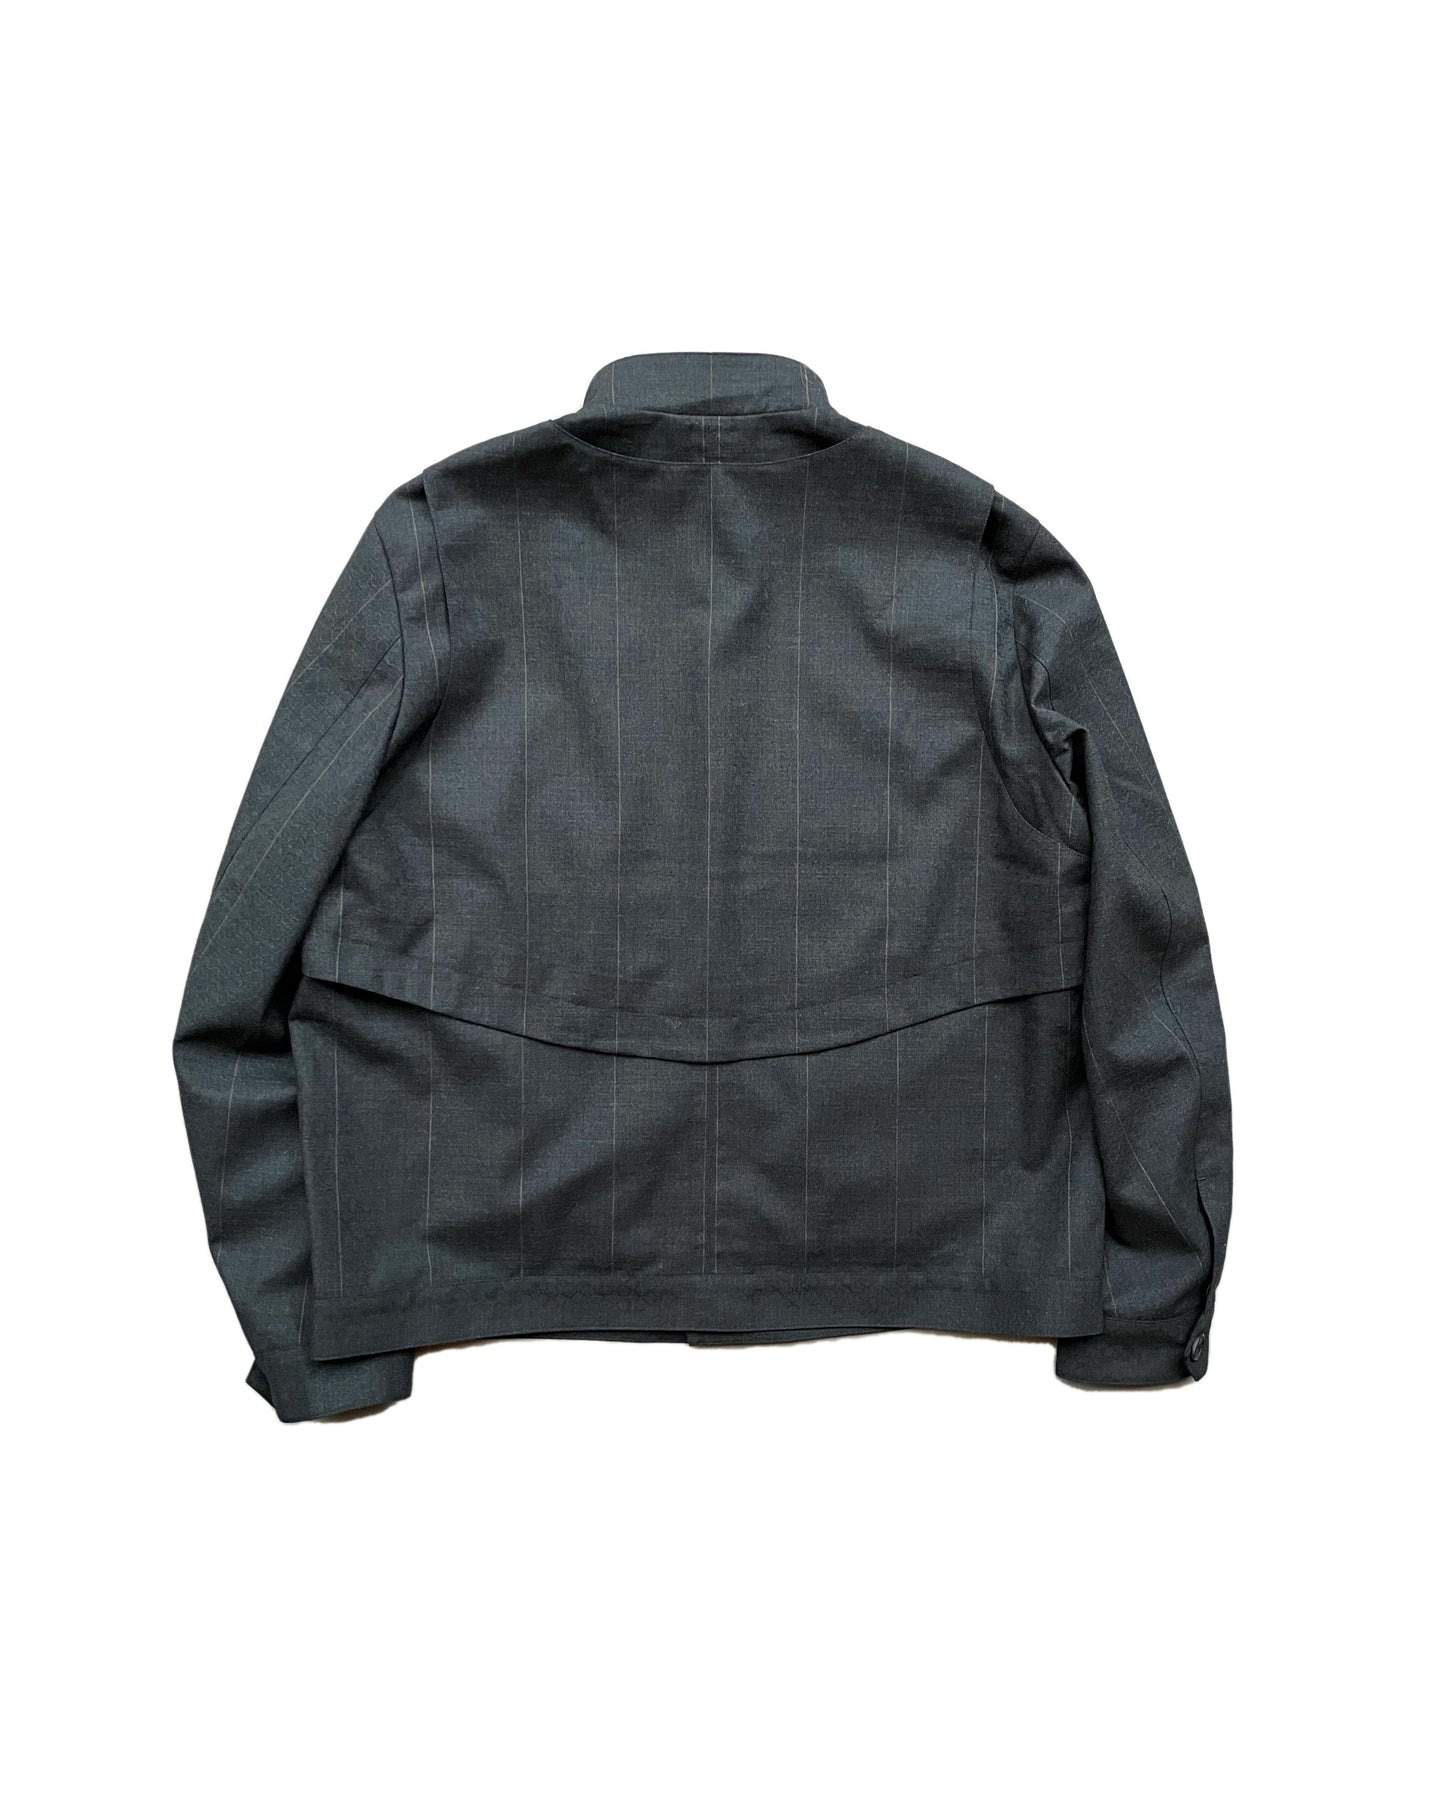 Call - CL_AW23_BL_03 / STAND COLLAR BLOUSON - Charcoal